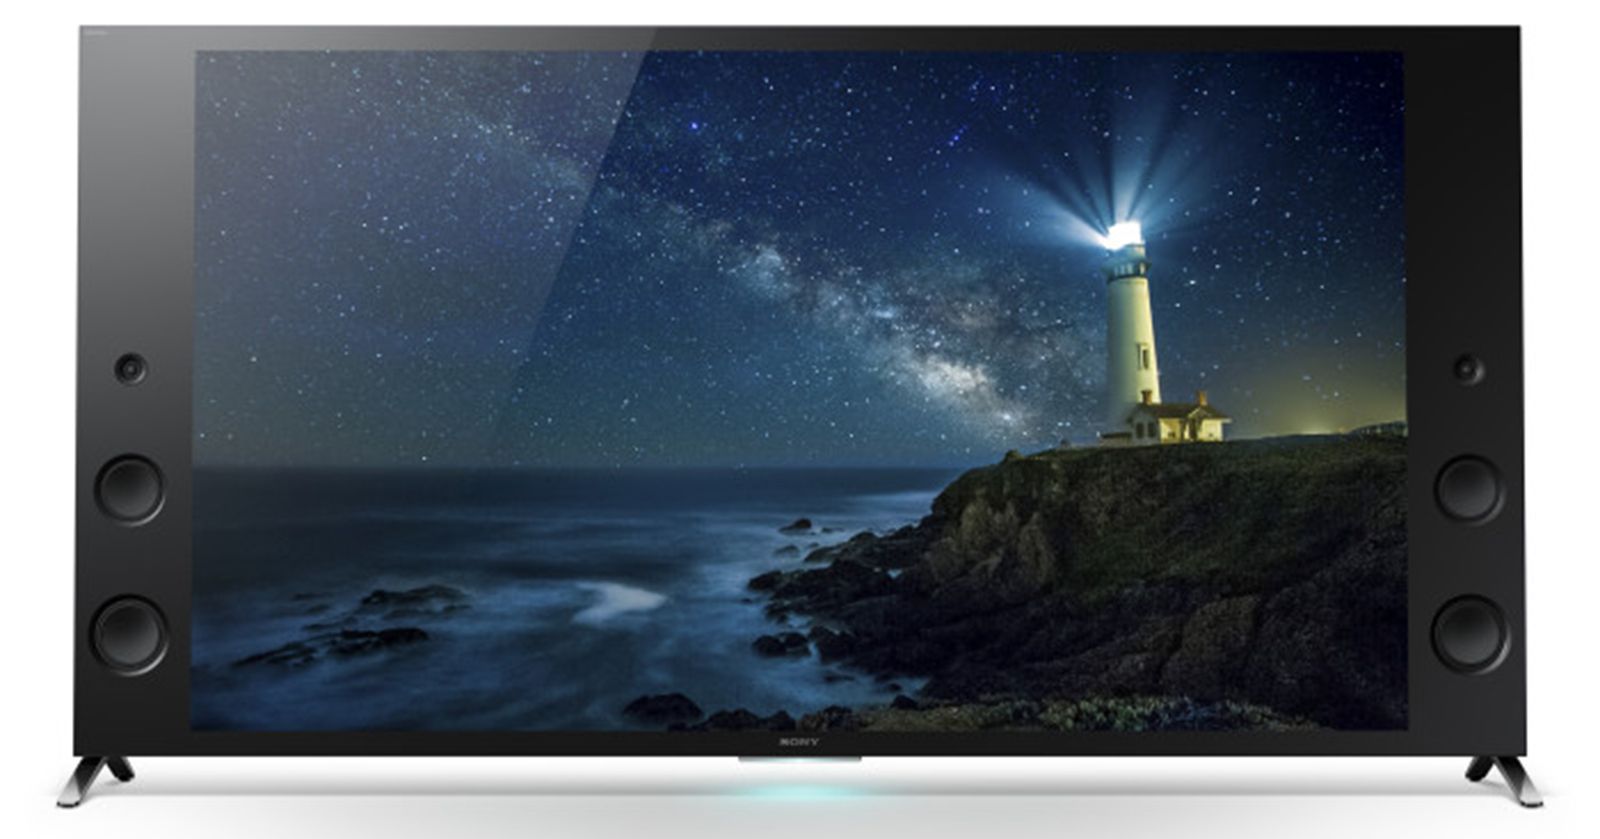 sony hdr 4k bravia tvs up for pre order today to ship in may image 1